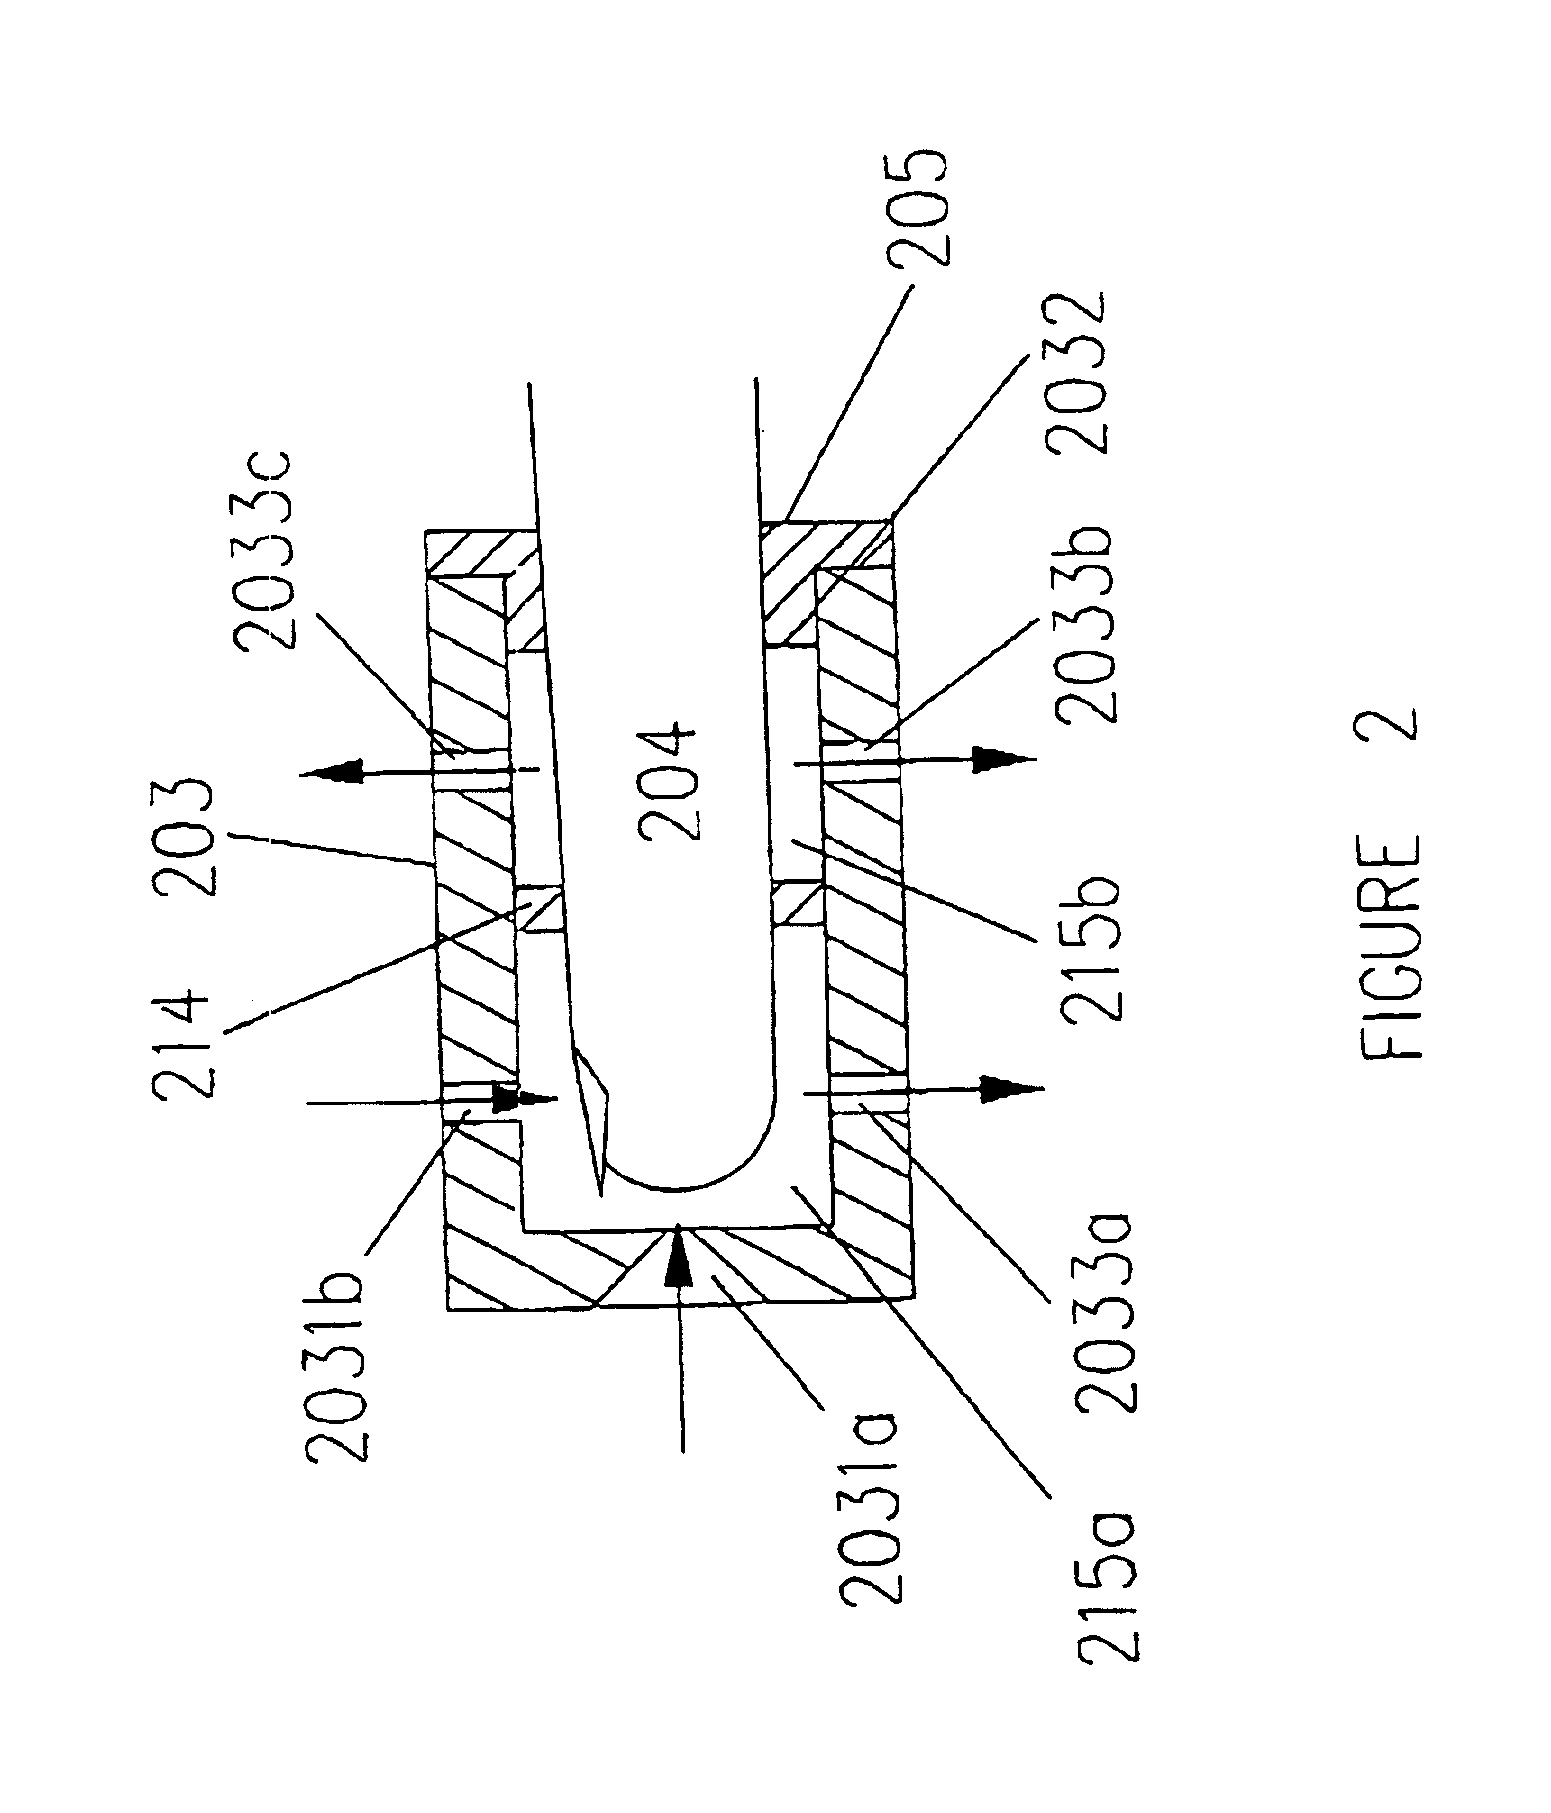 Raman spectroscopic system with integrating cavity